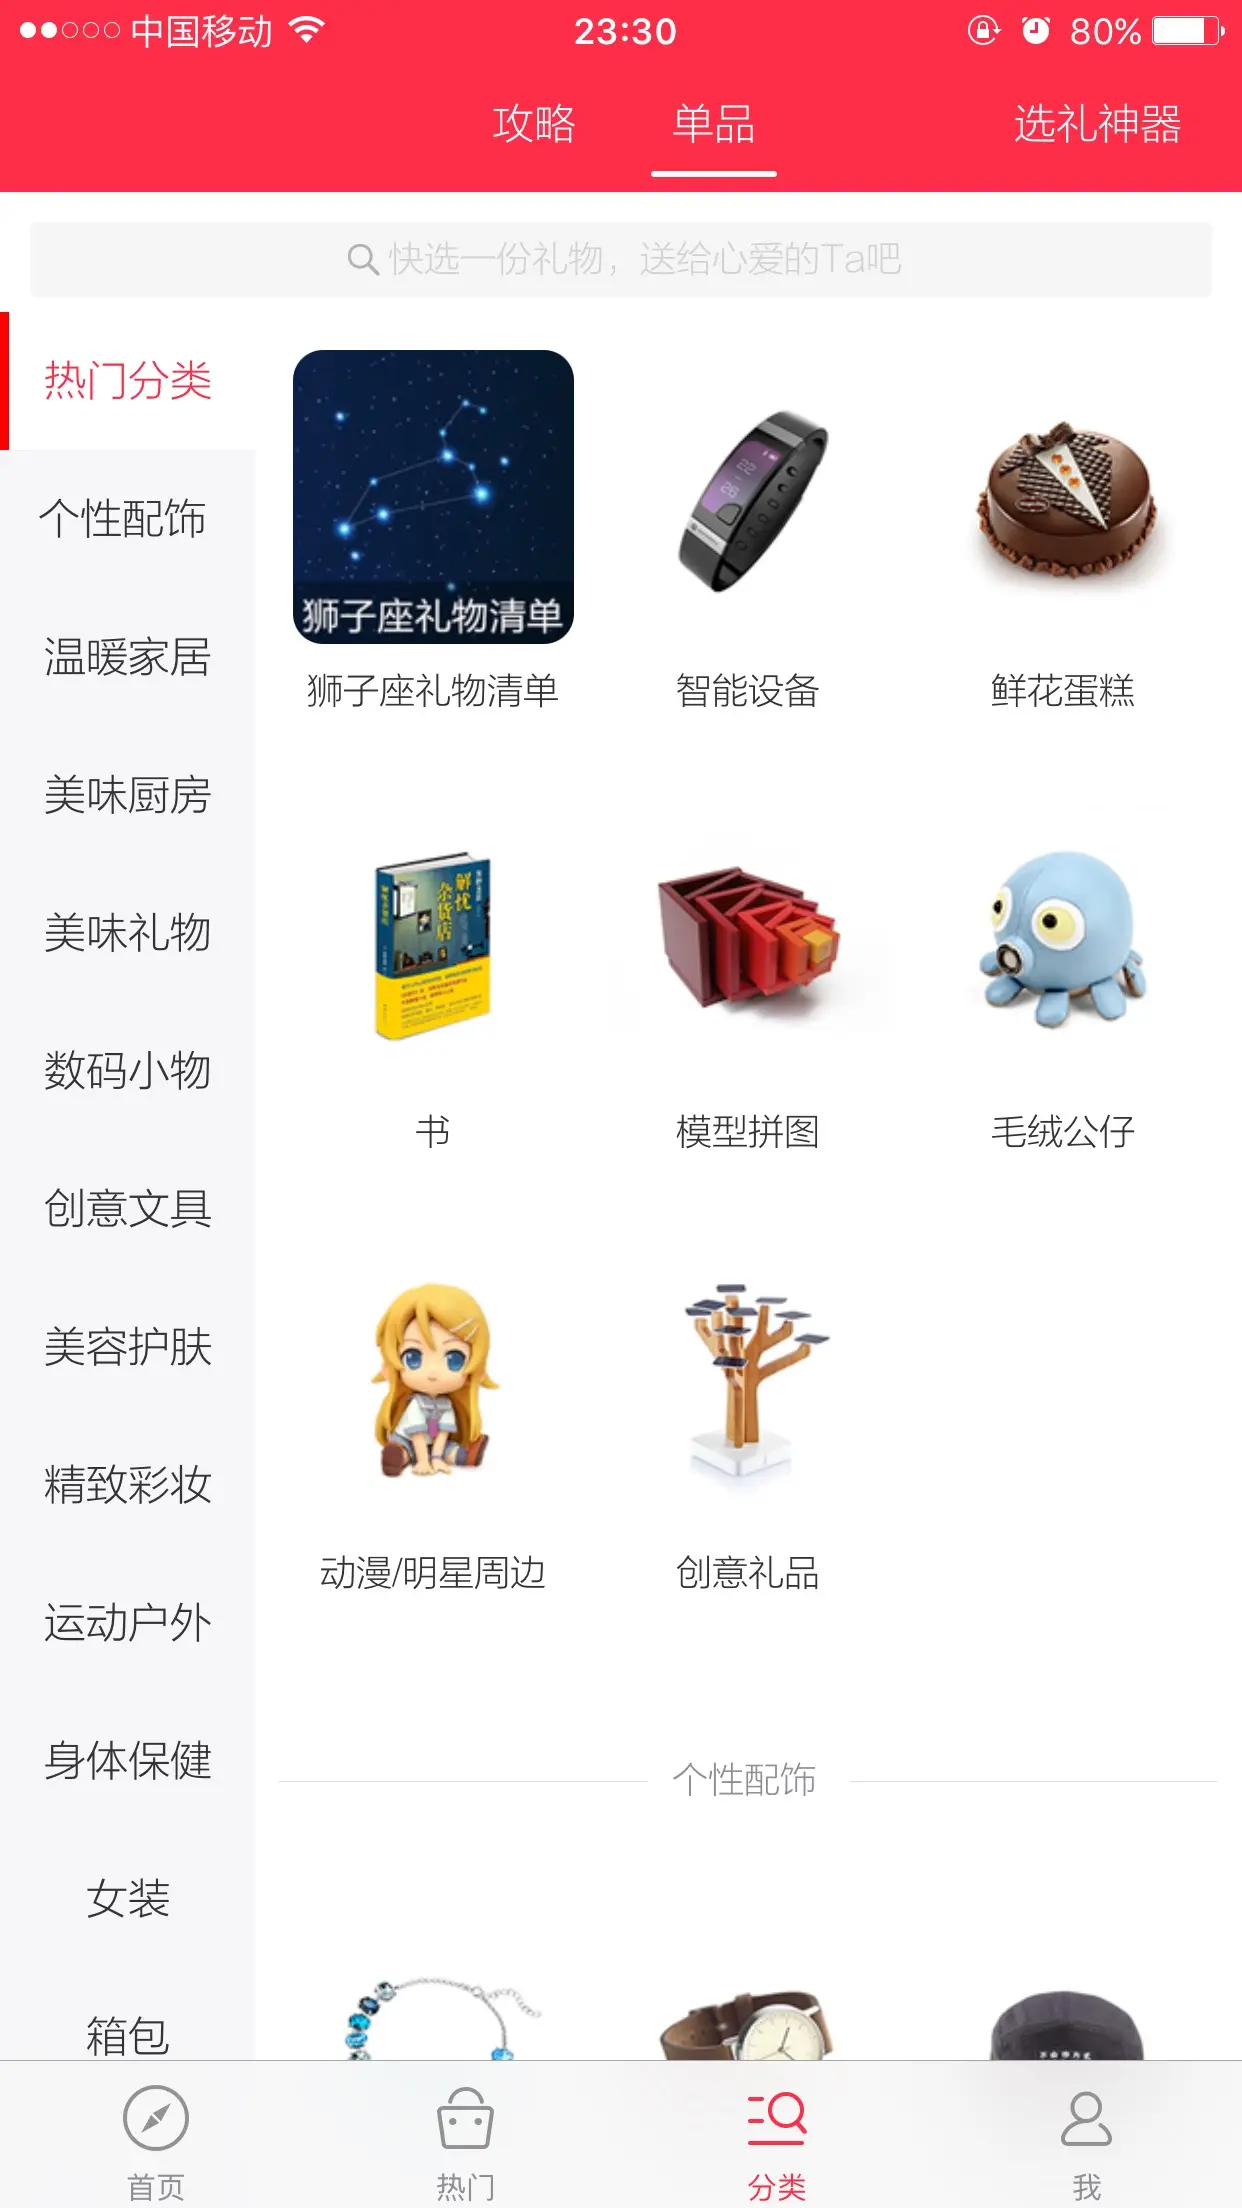  TablView 与 CollectionView 之间的联动效果图